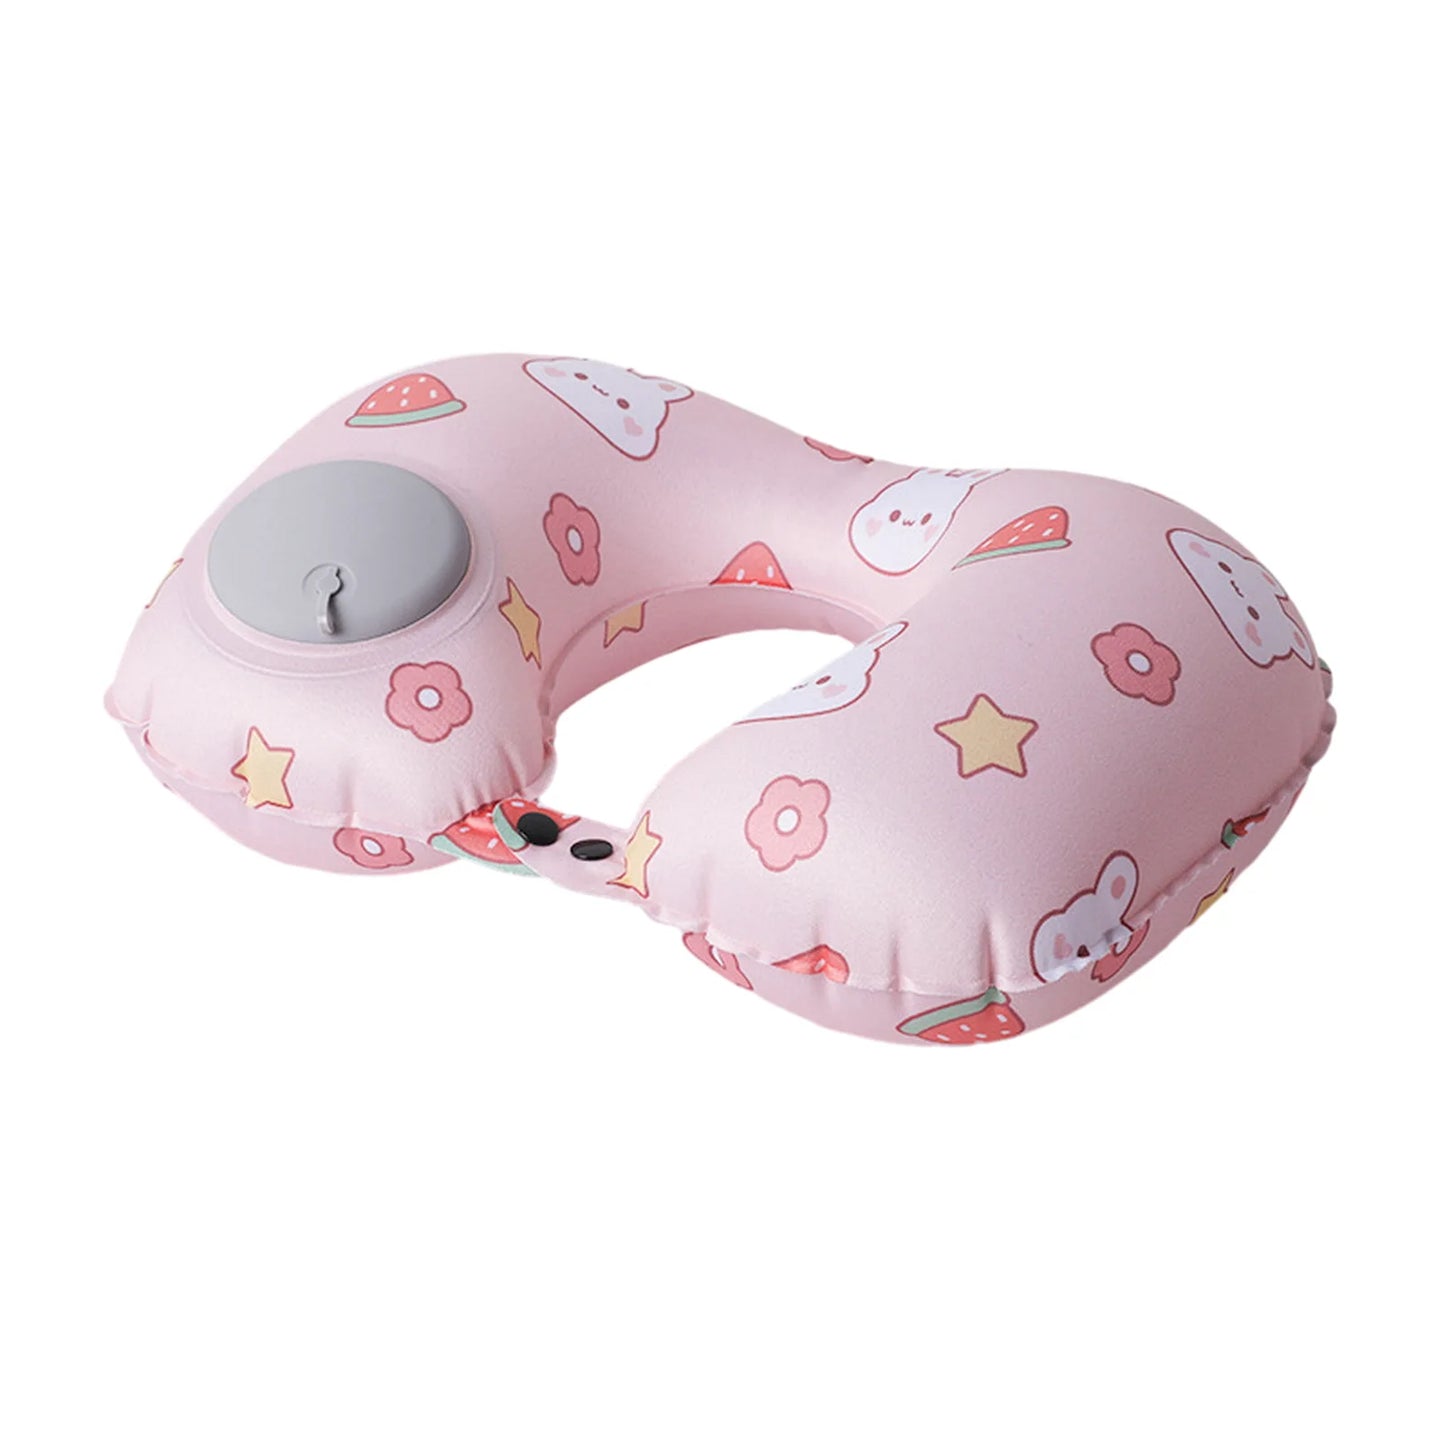 A product image of the Bunny Press-Inflatable_Neck_Pillow